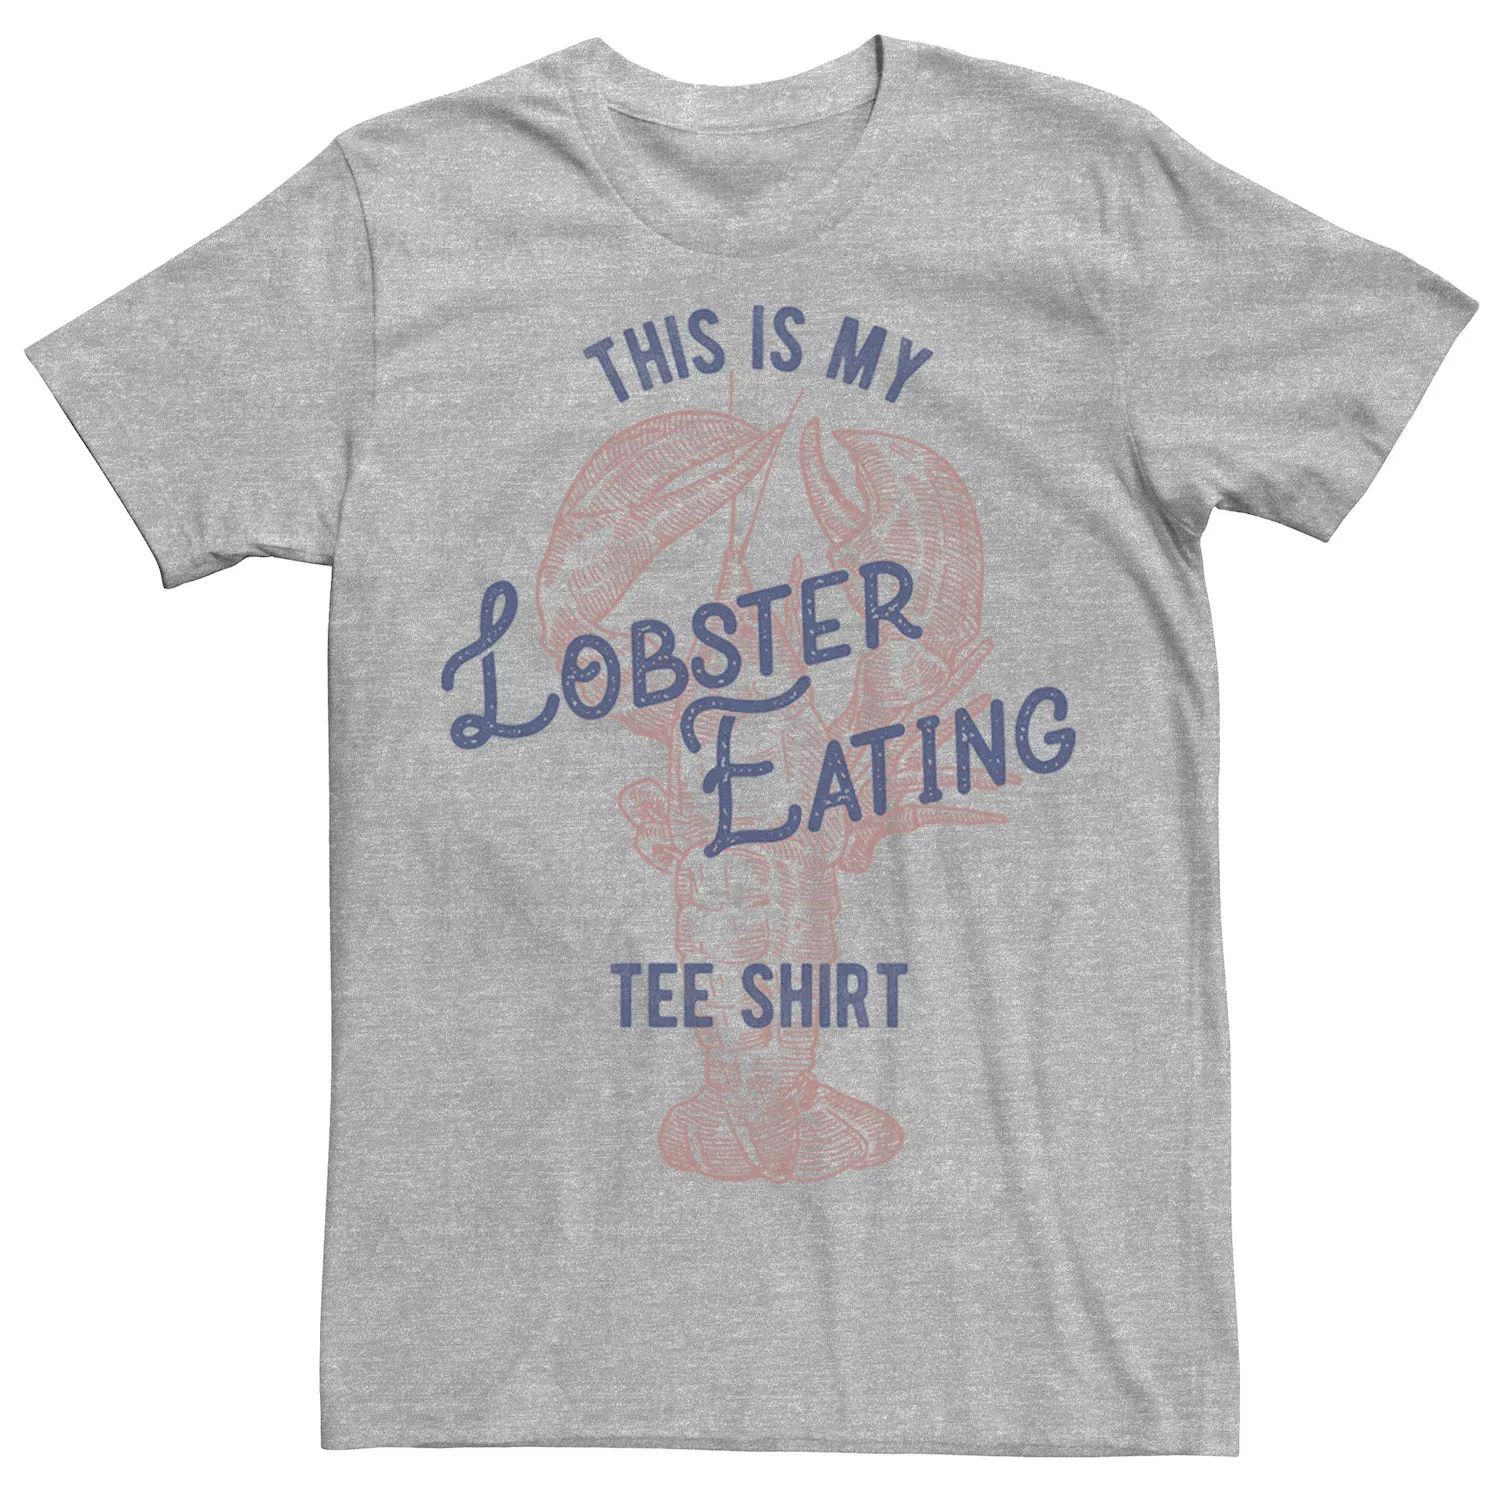 Мужская футболка This Is My Lobster Eating Shirt Licensed Character